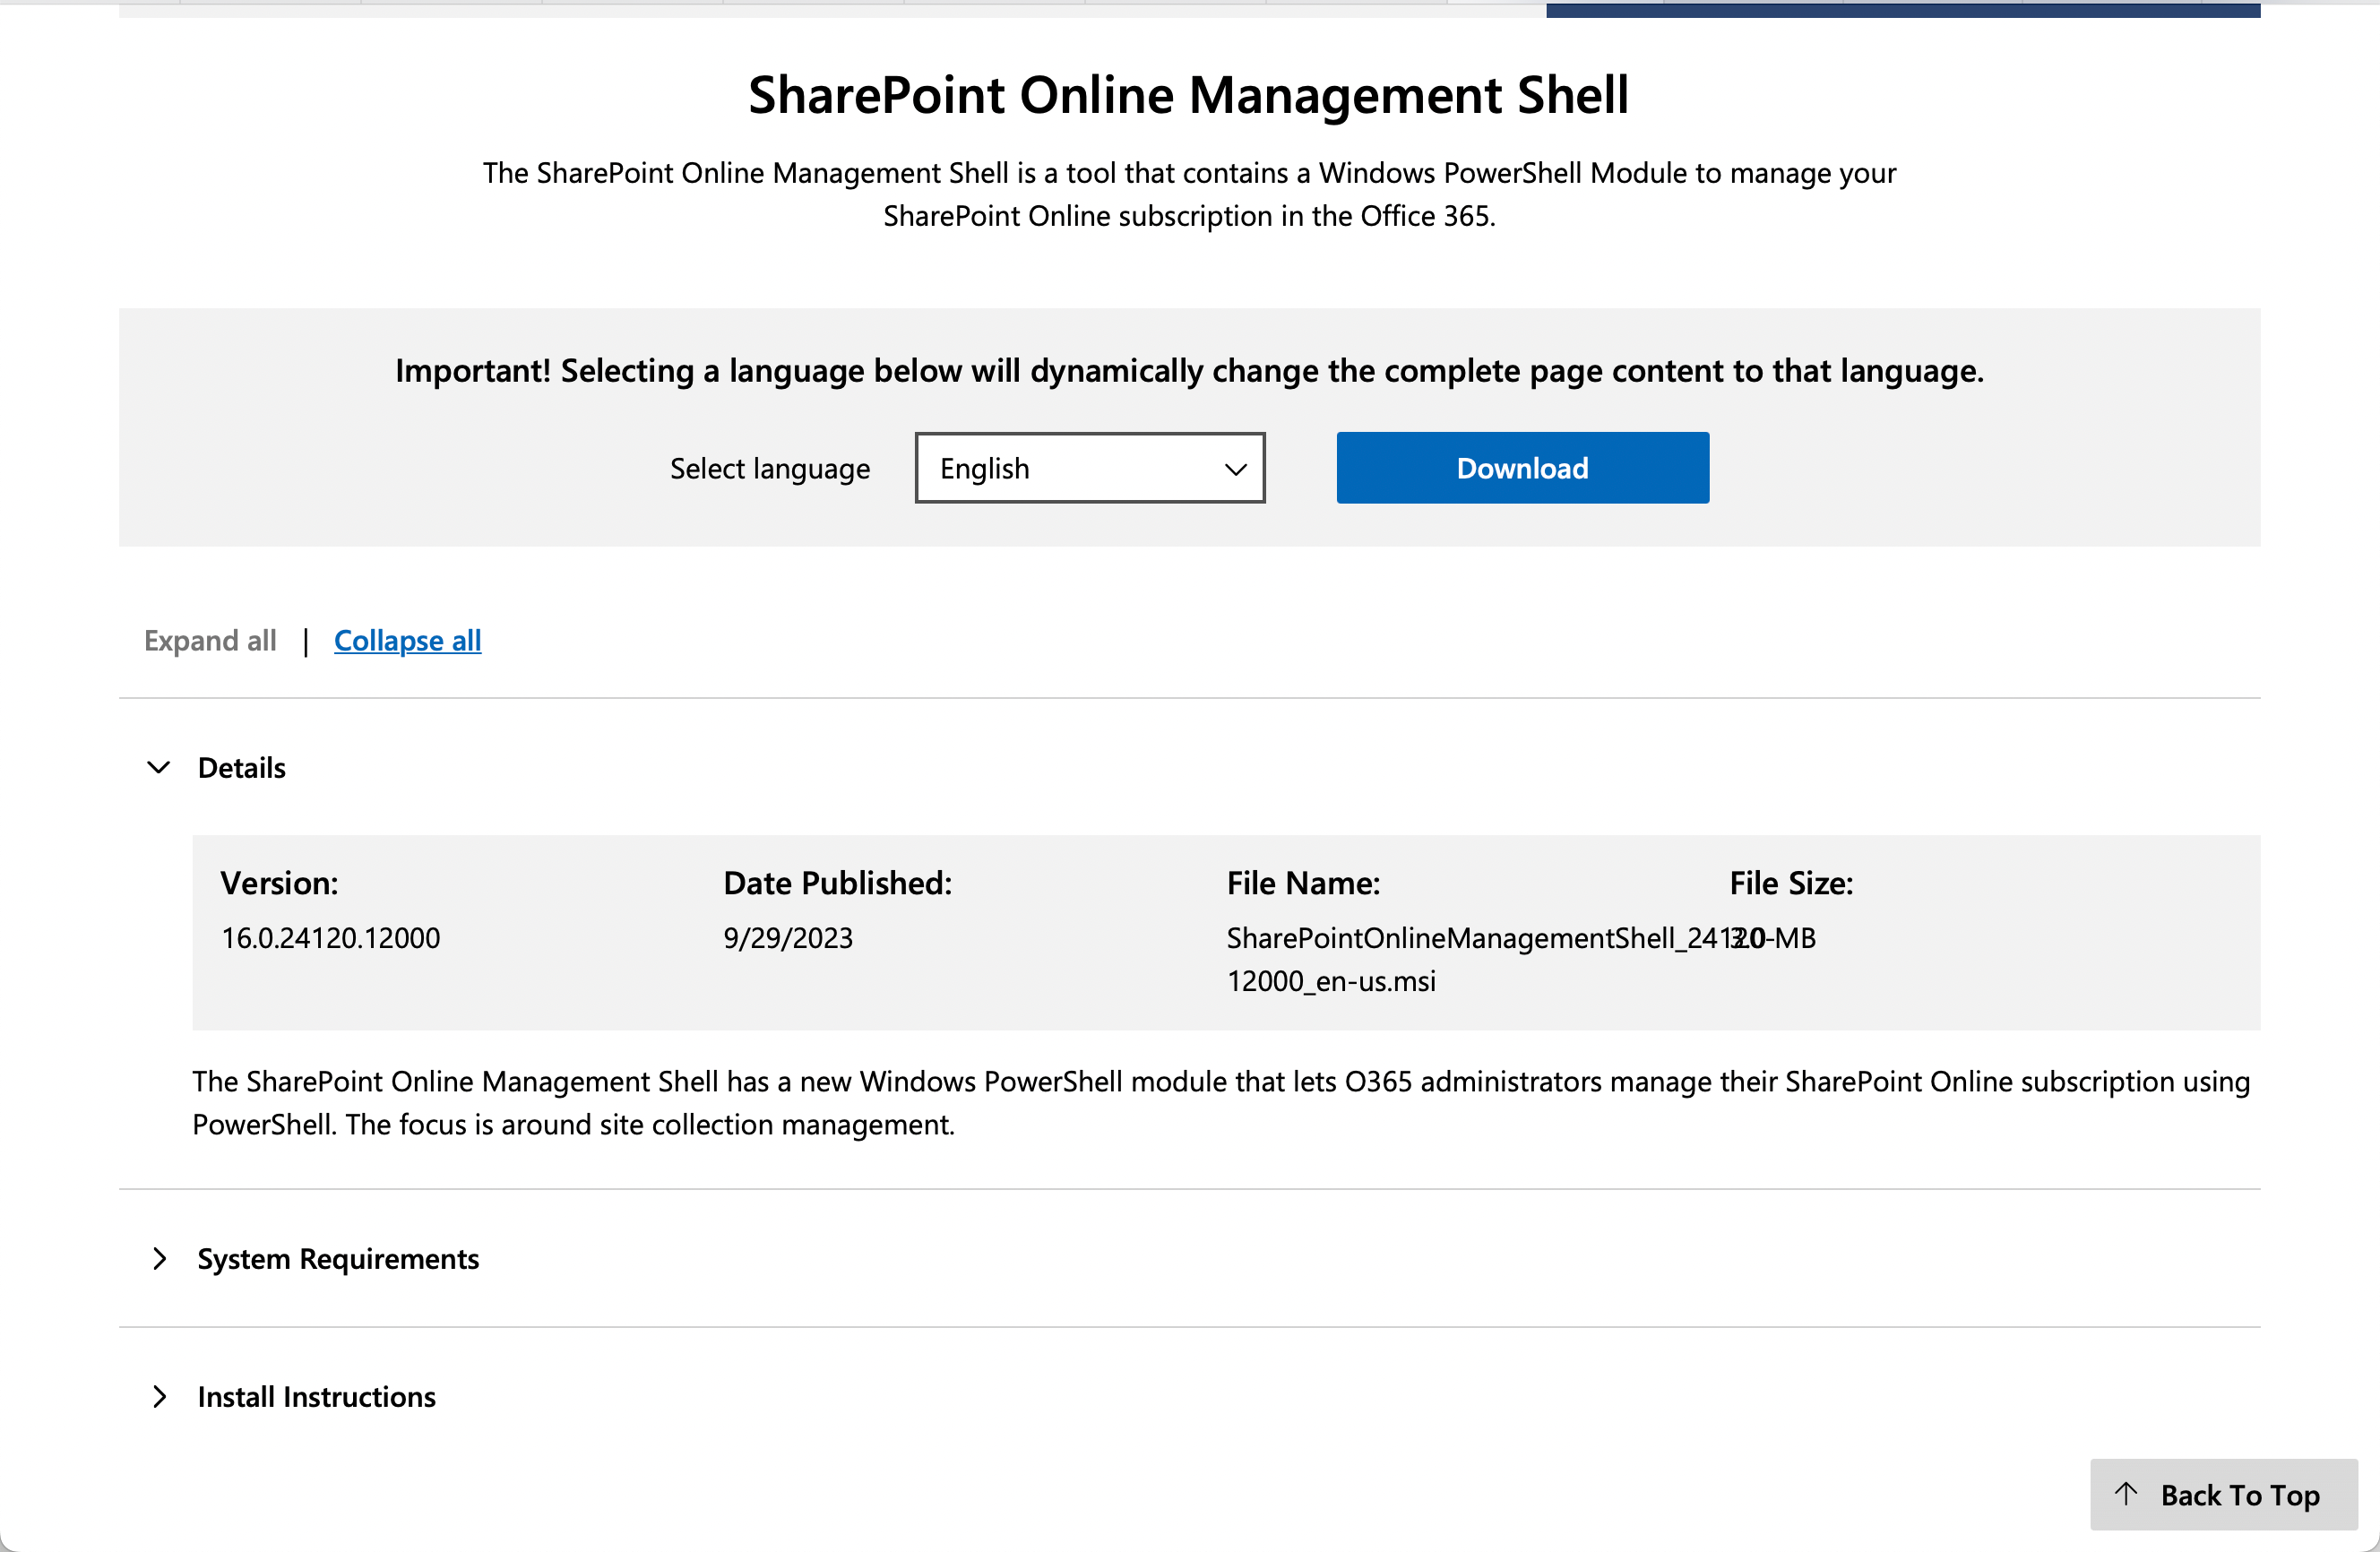 SharePoint Online Management Shell download page